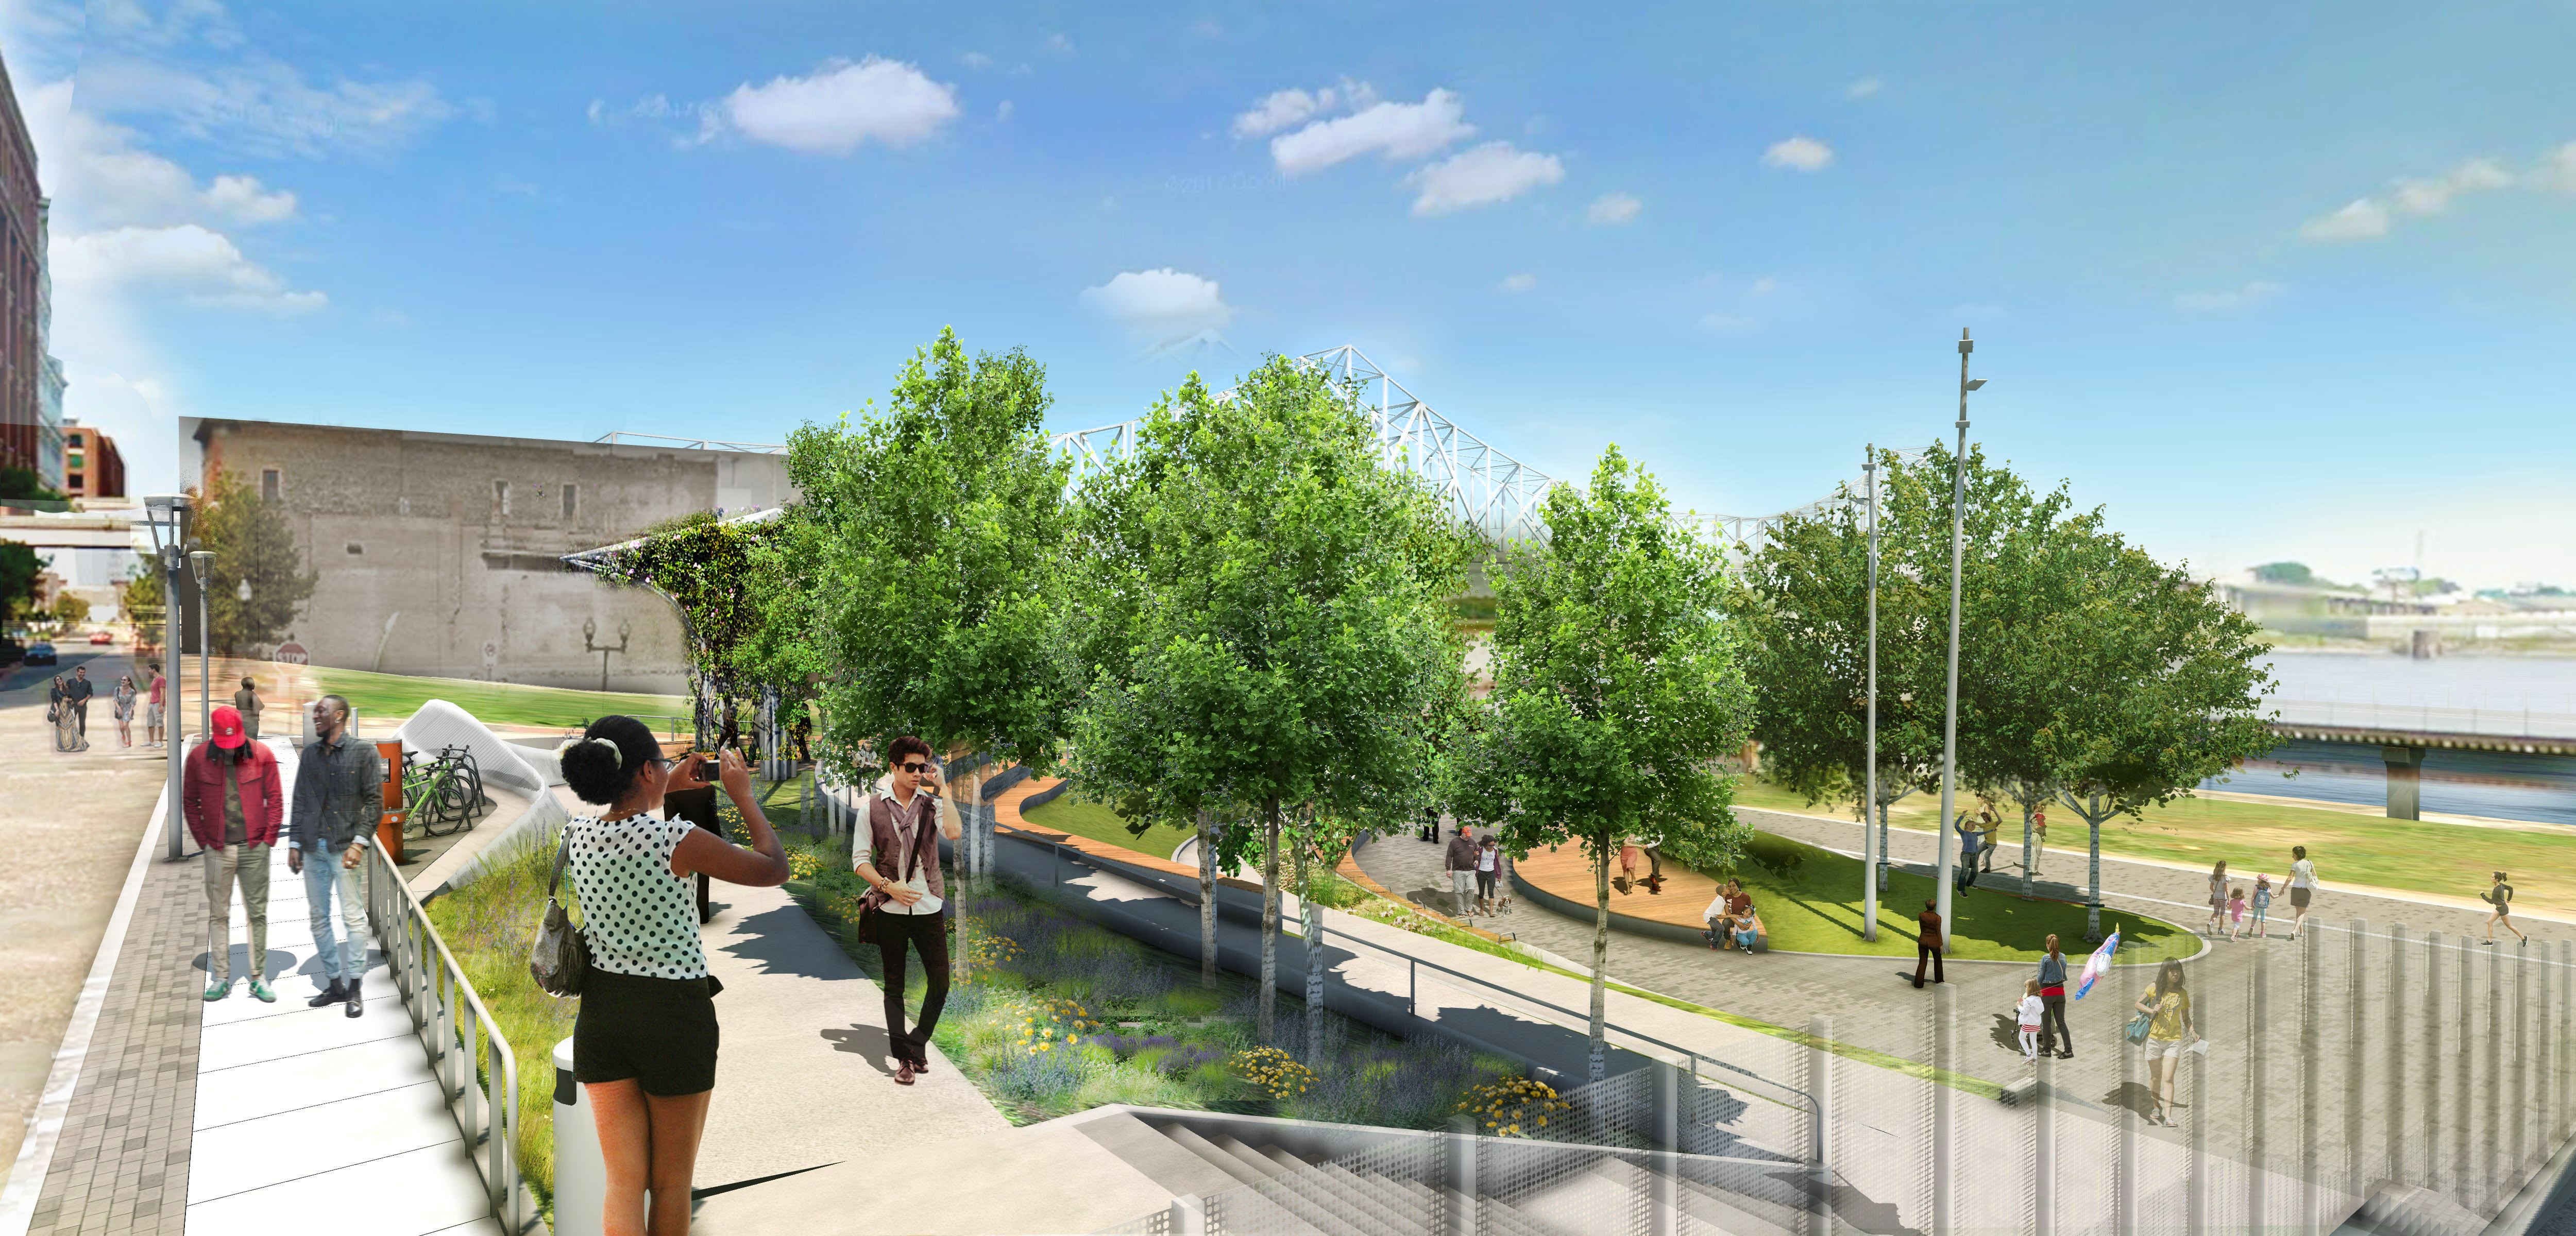 Rendering of The Katherine Ward Burg Garden project along the Riverfront